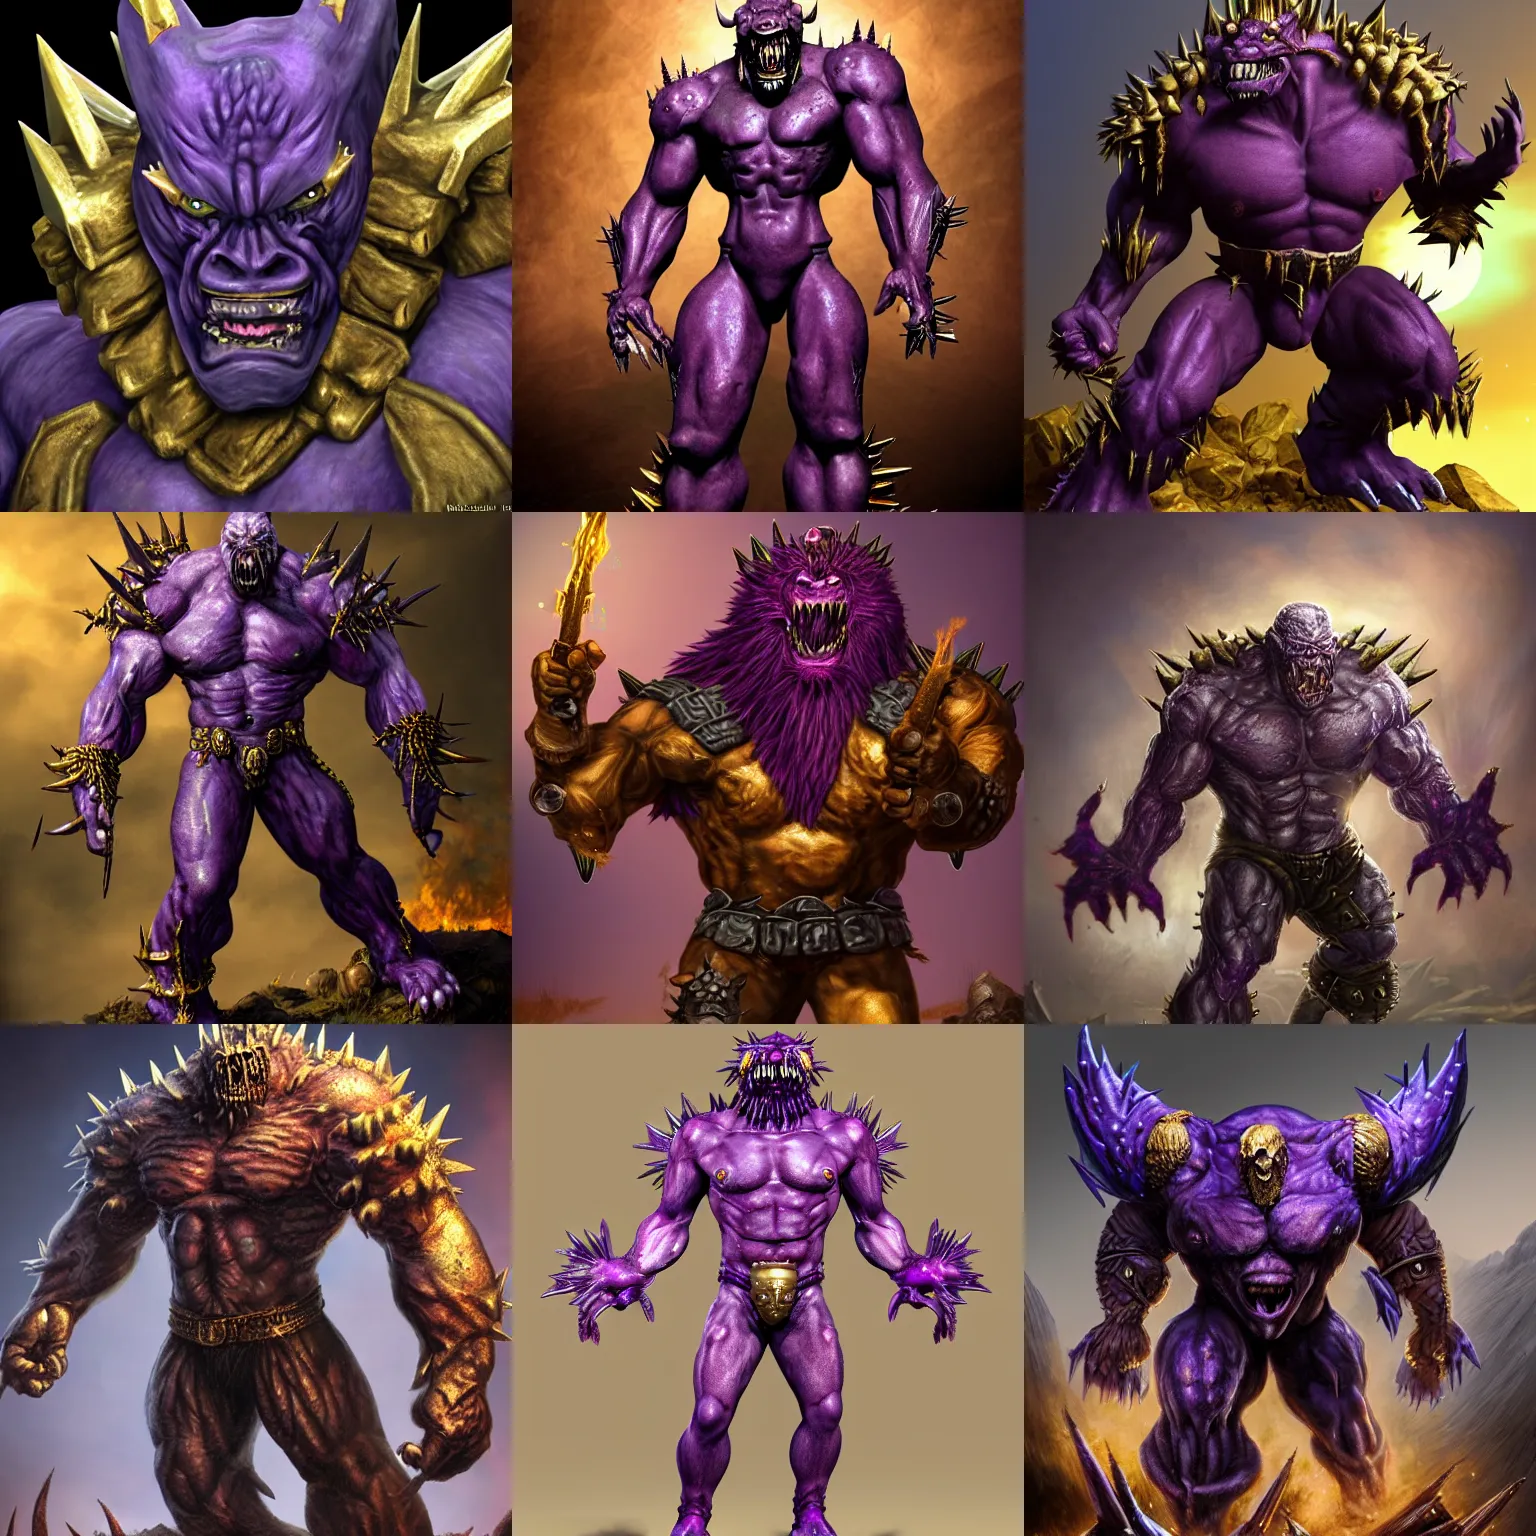 Prompt: ugly monster by Chris Metzen, spikes on the body, skin spikes, purple skin, huge muscles, gold armor, battleground background, battlefield